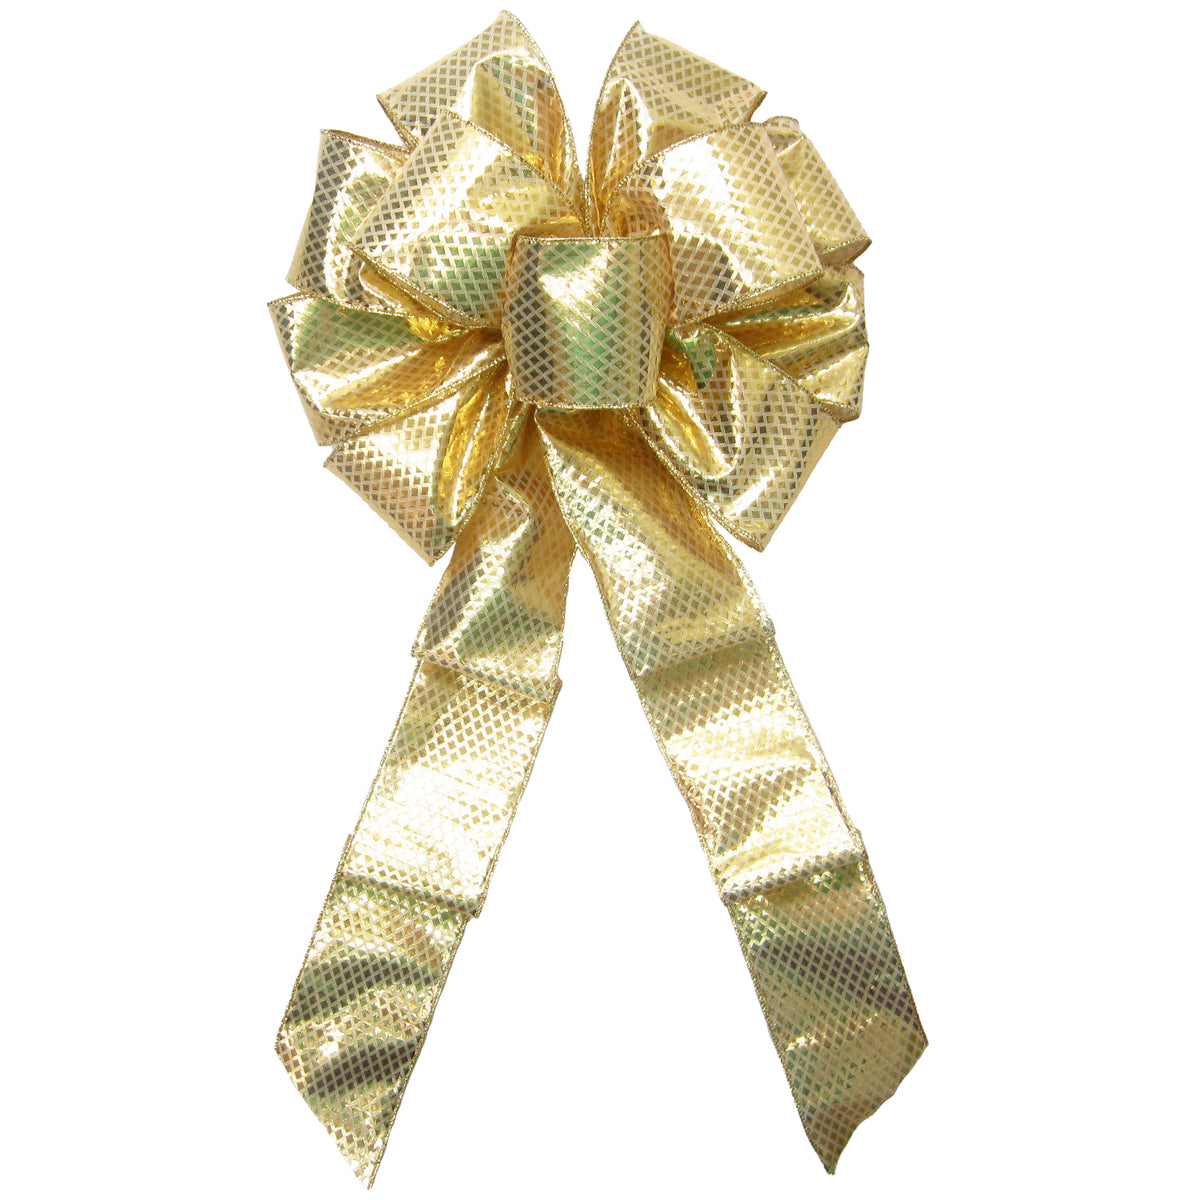 10 Metallic Gold Wired Wreath Bow